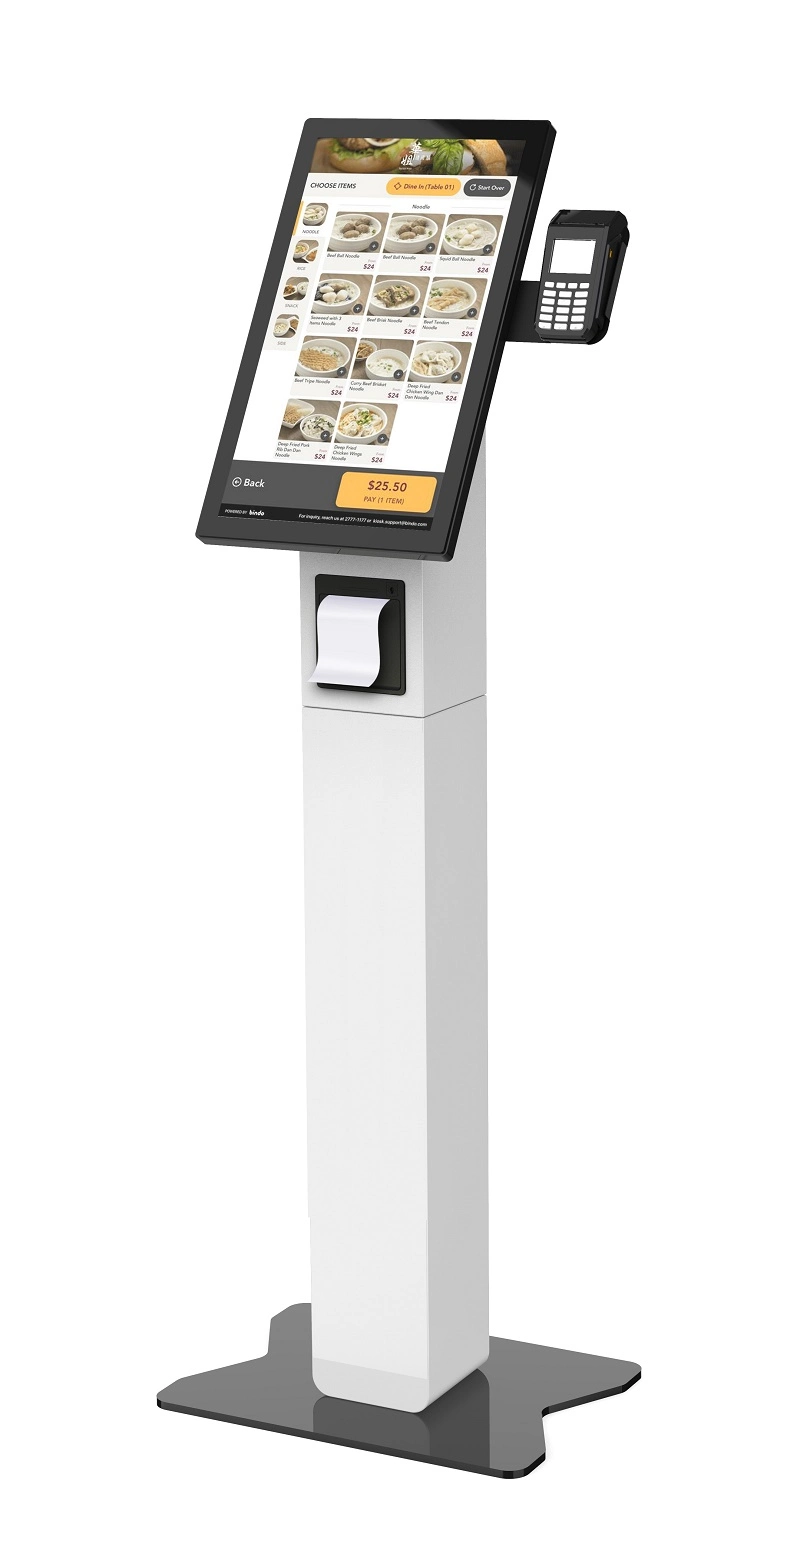 Touch Screen POS System Self Pay Self Service Payment Order Kiosk for Mcdonald Kfc Restaurant Manufacturers